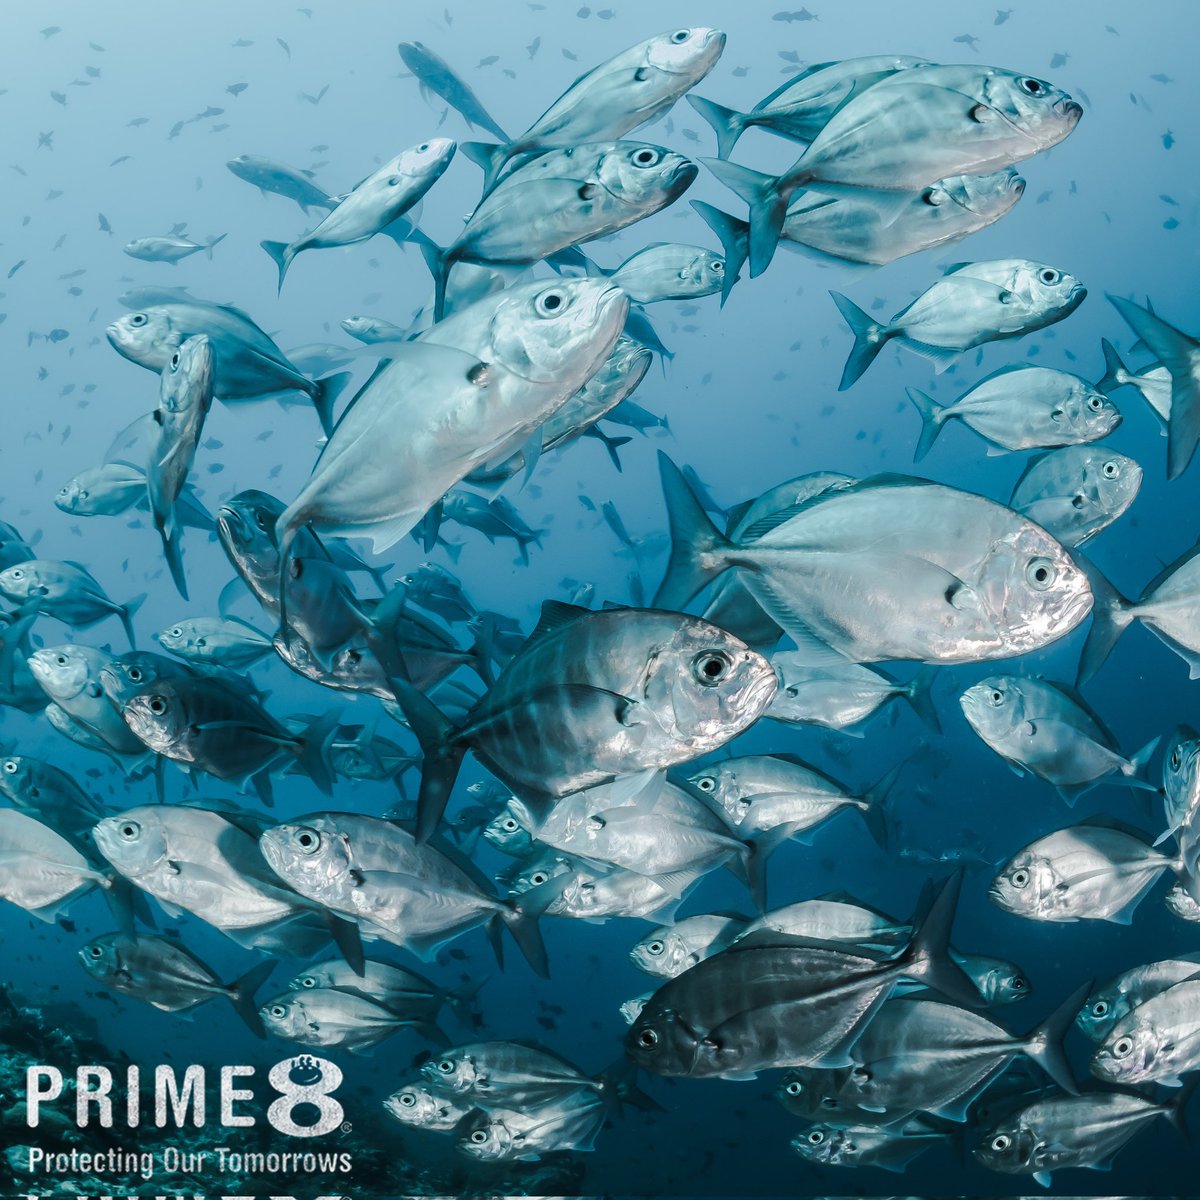 200 species of #marinefish that are consumed by humans are known to be ingesting plastic! Something we all need to think about 🌊 #environment #climatechange #conservenature #plasticfree #oceanlife #marine   #children #education #educationalgames #childrengames  #Prime8 #Primasia